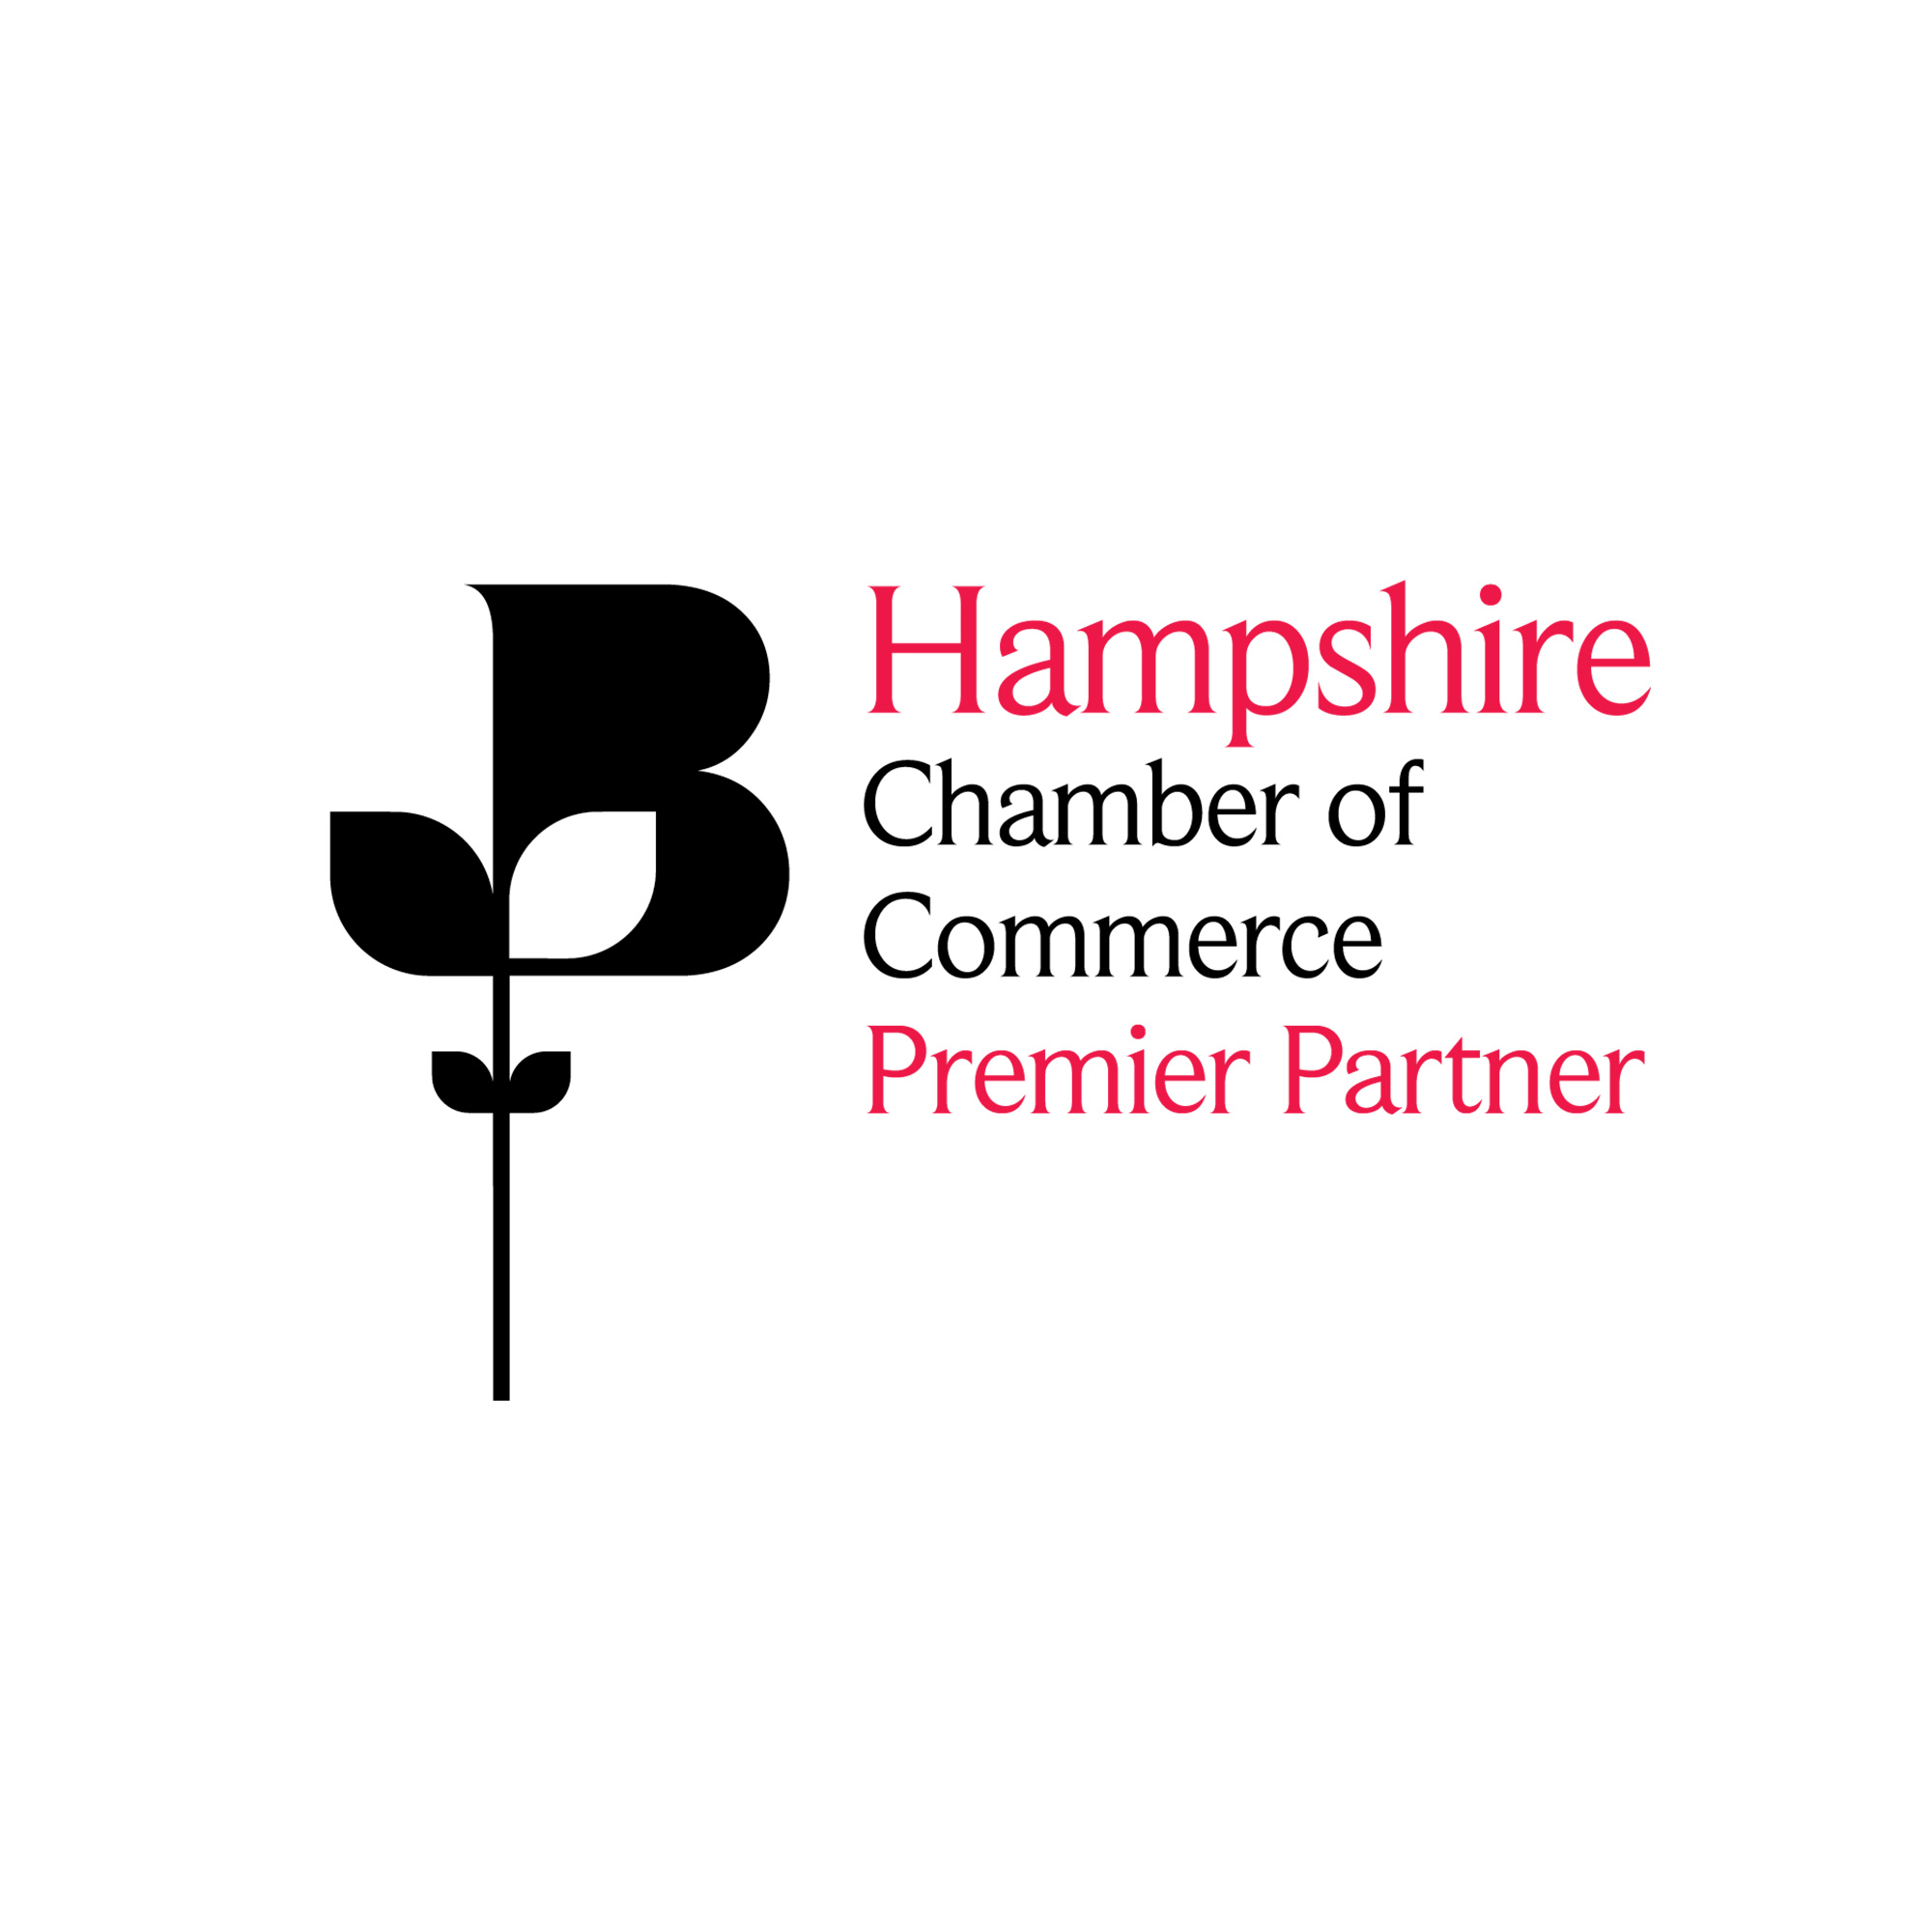 Hampshire Chamber of Commerce